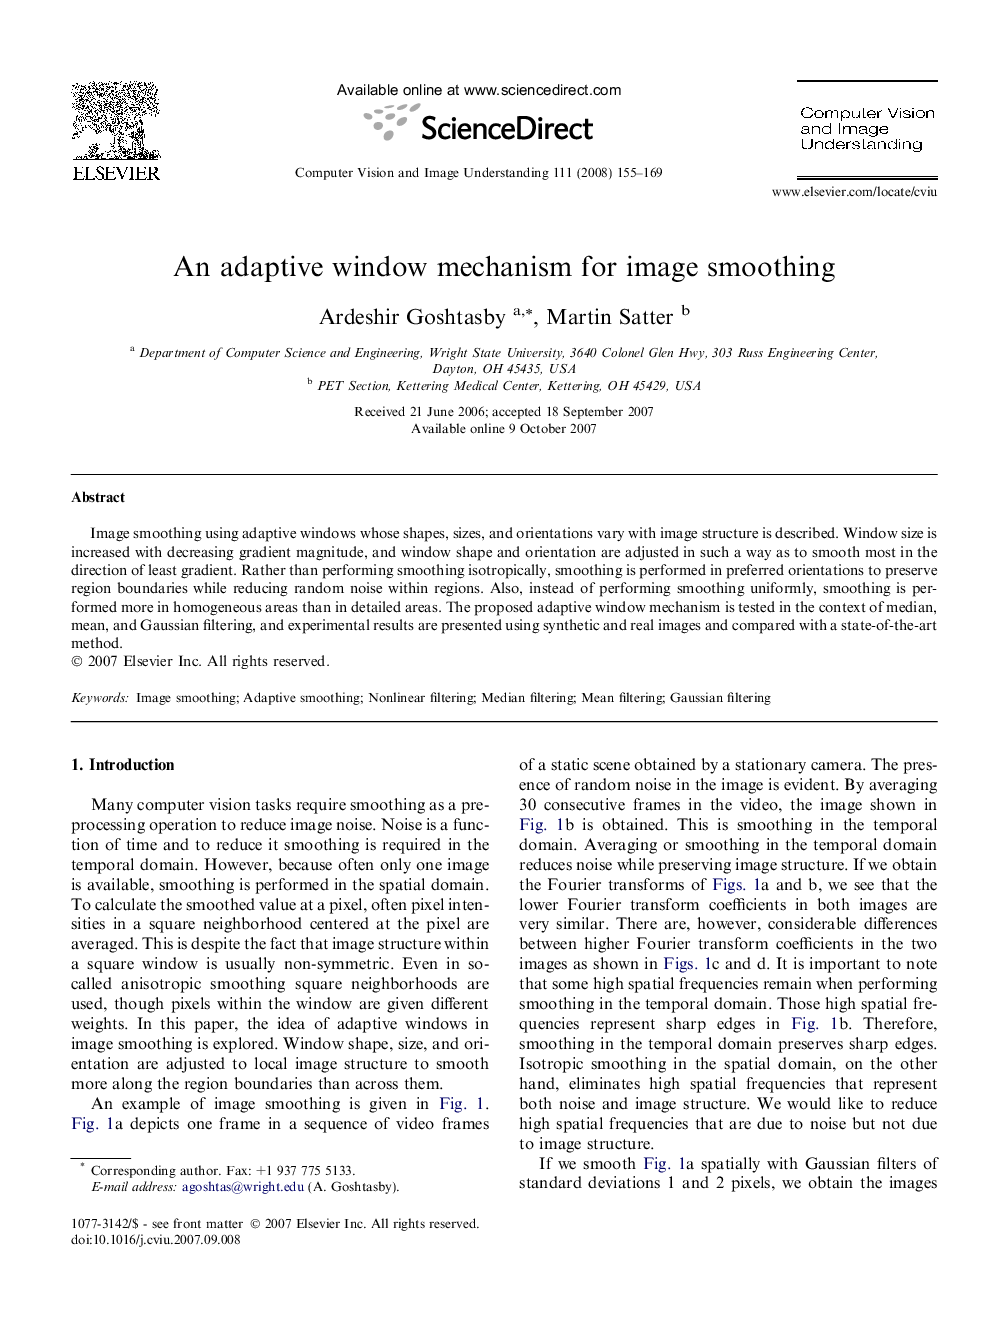 An adaptive window mechanism for image smoothing